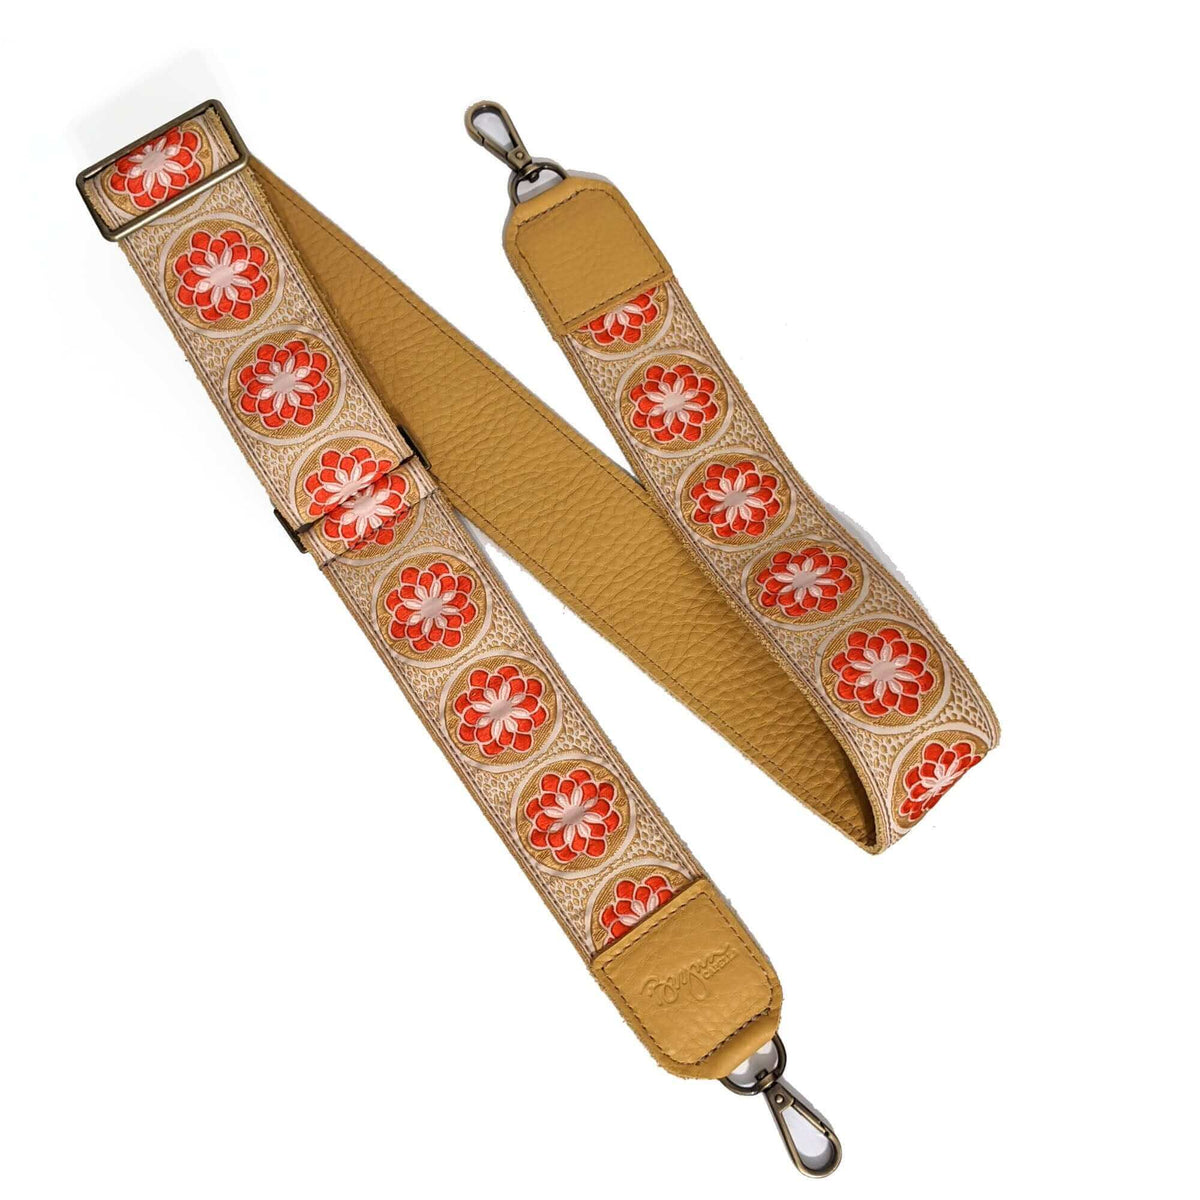 Adjustable Guitar Bag Strap, Golden/Red Daisy print, leather